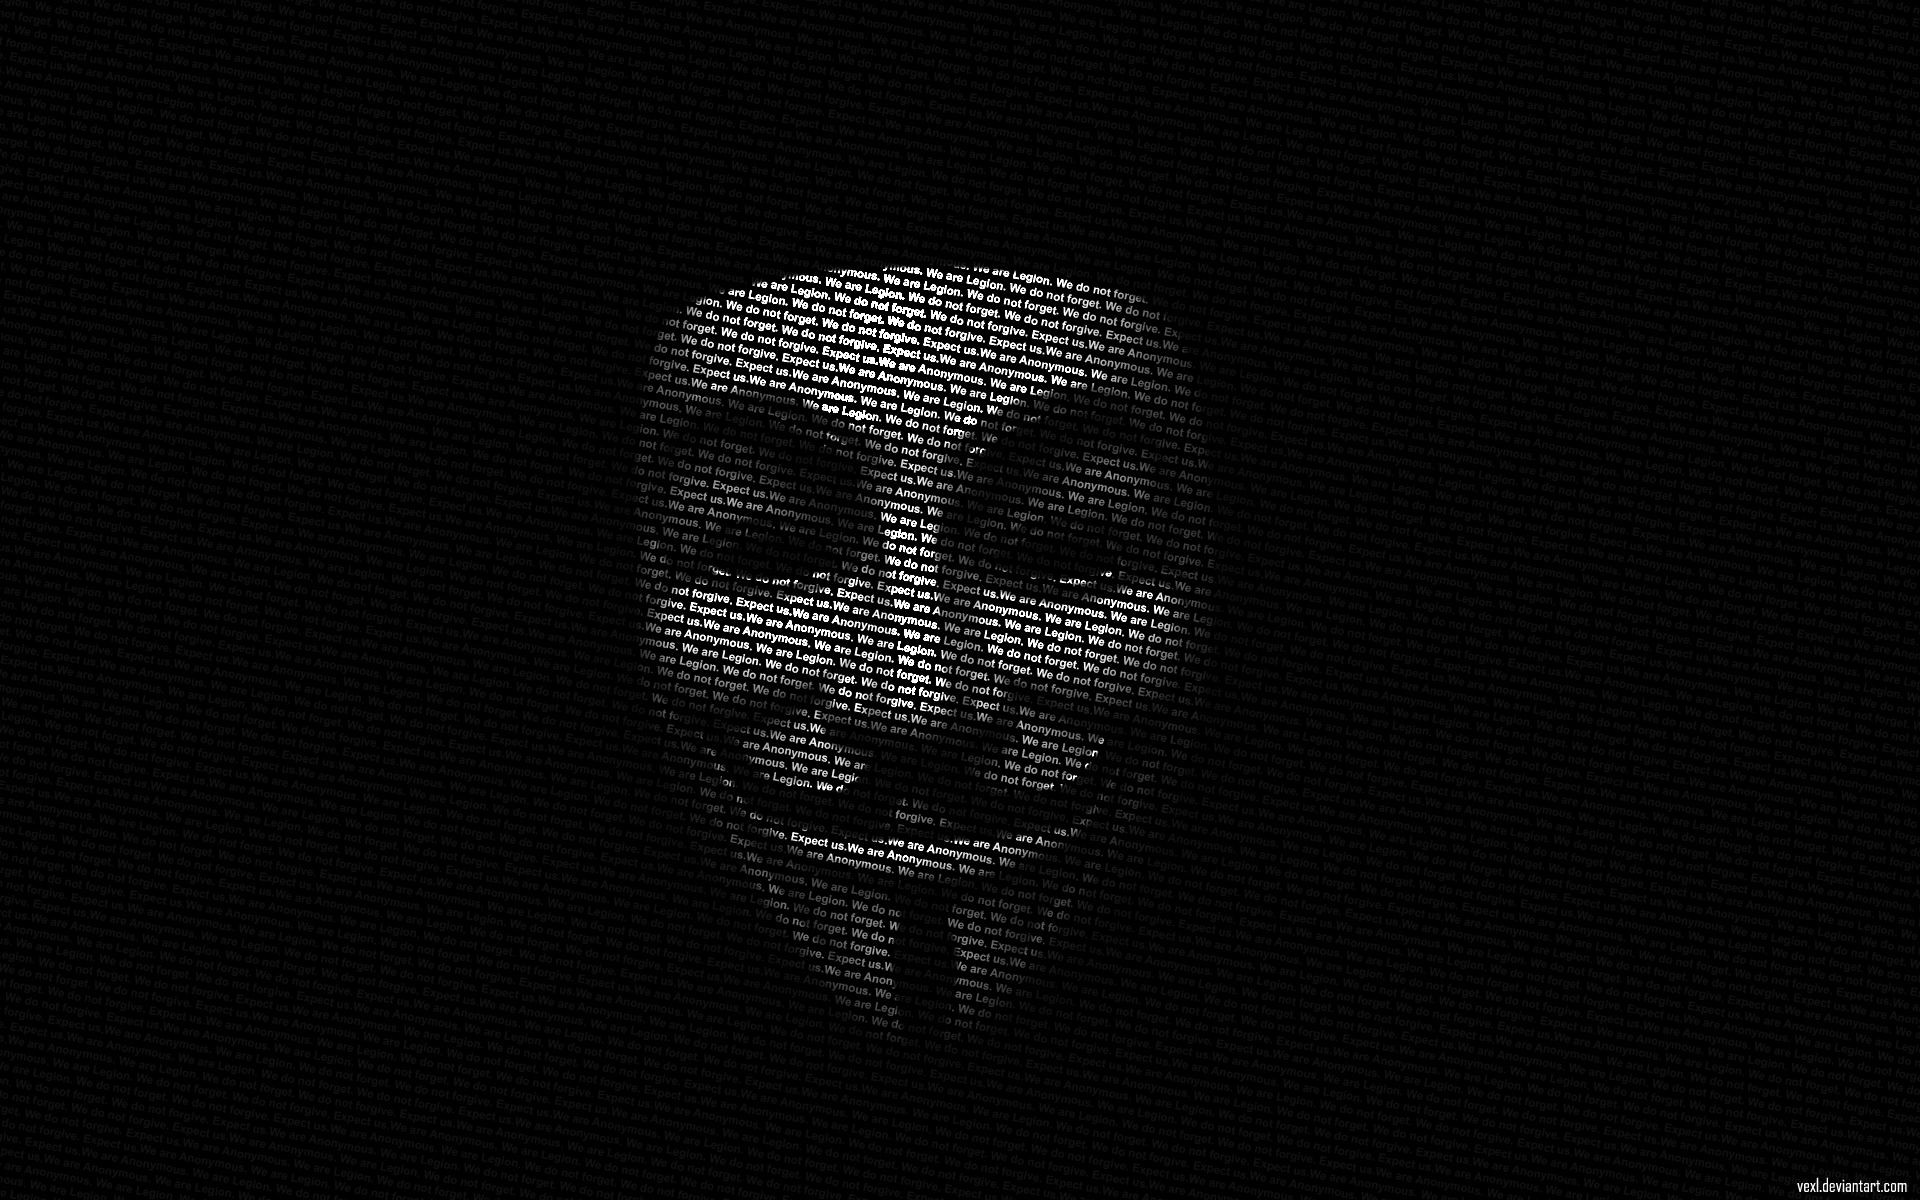 Black Guy Fawkes Typographic Portraits Hackers Hacking Digital Art Face Guy Fawkes Mask 1920x1200